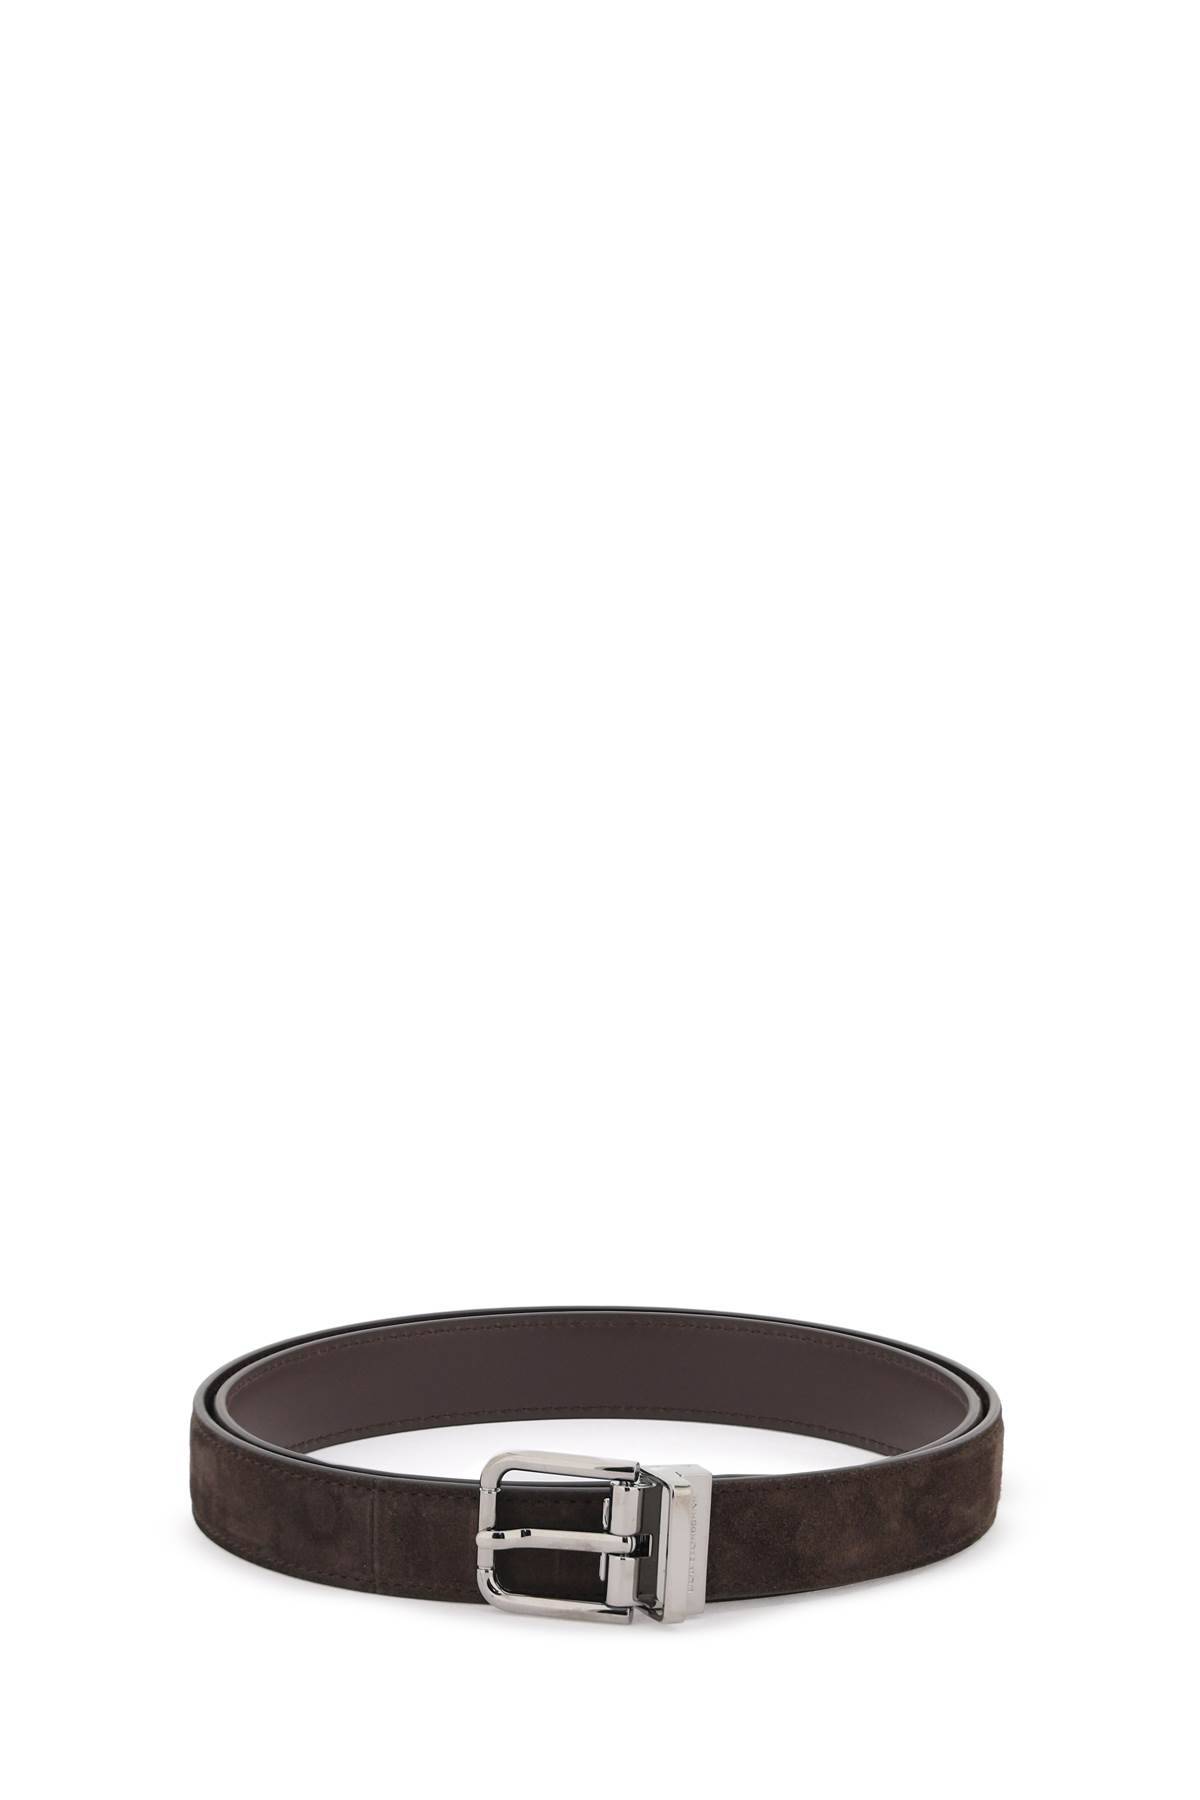 Shop Dolce & Gabbana Suede Belt For Stylish In Brown